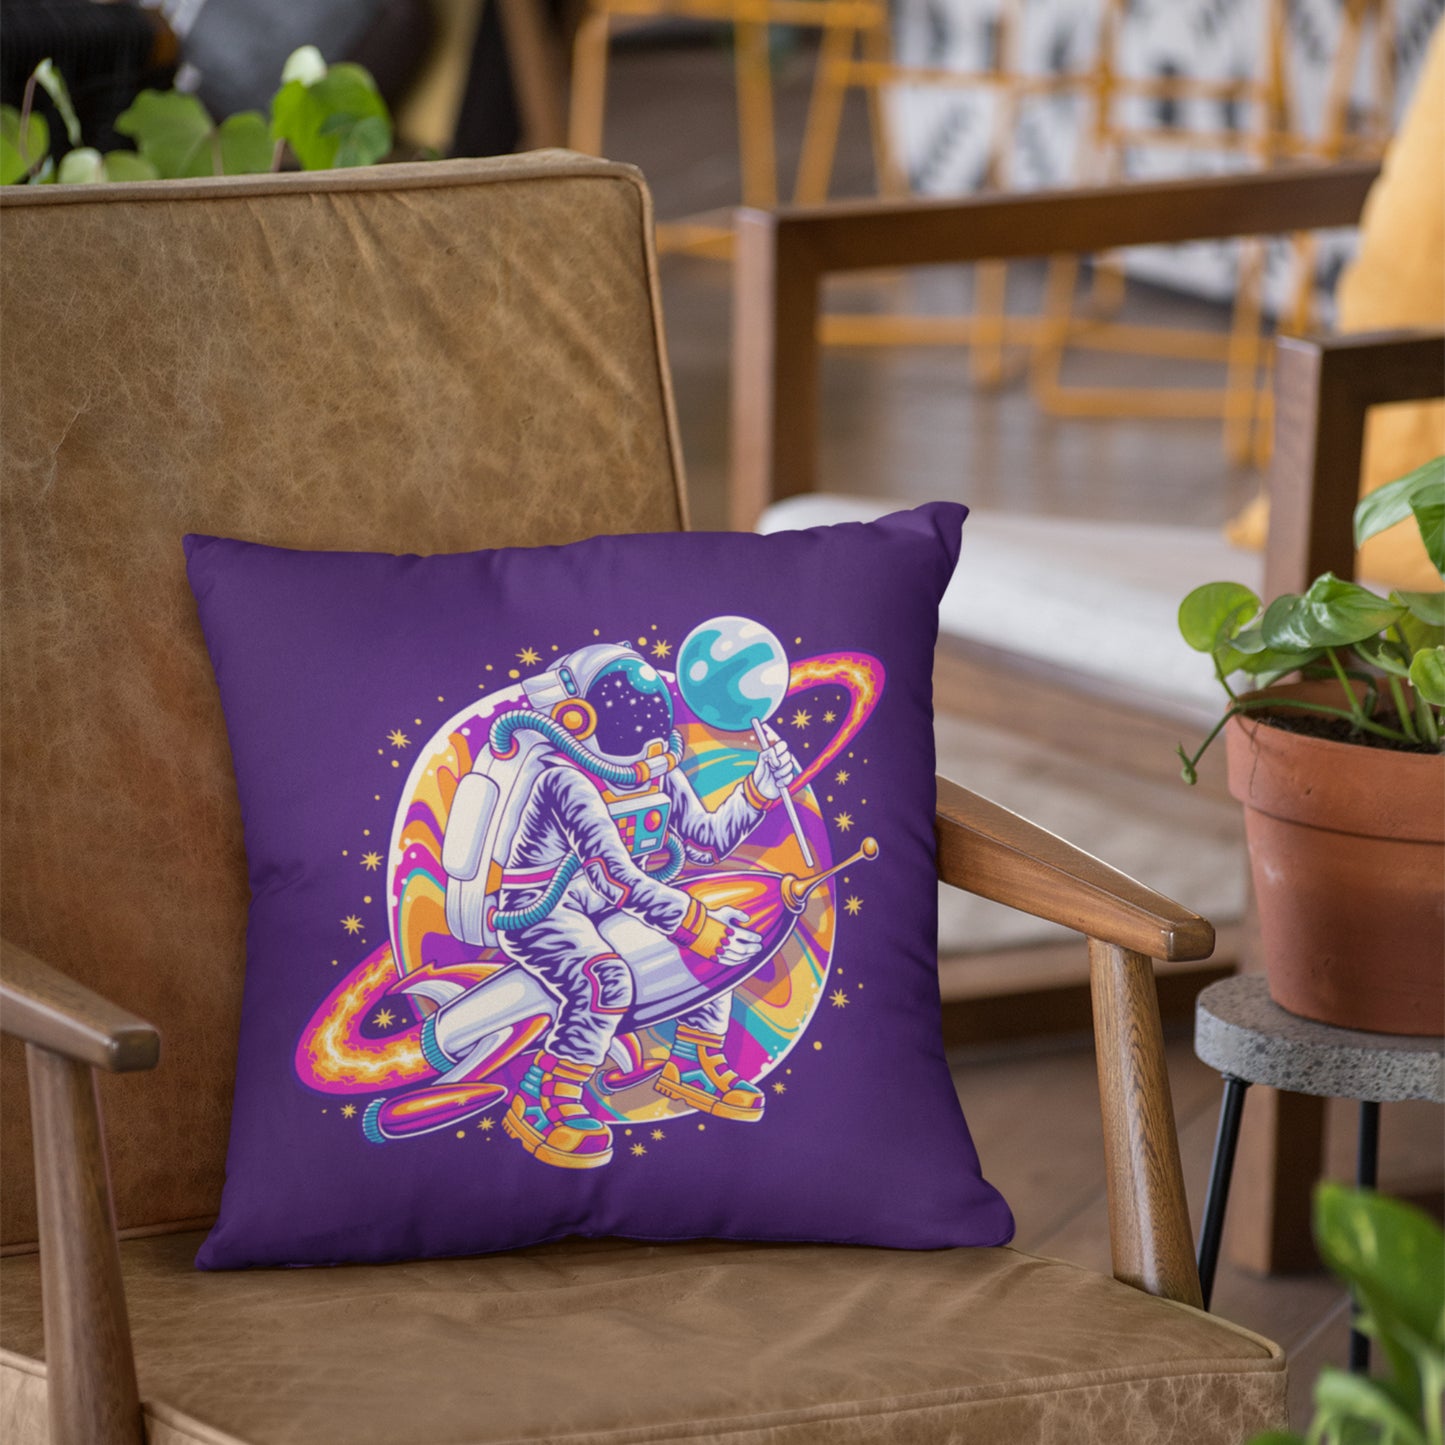 Stylish Printed Throw Pillow with Space Rocket and Lollipop